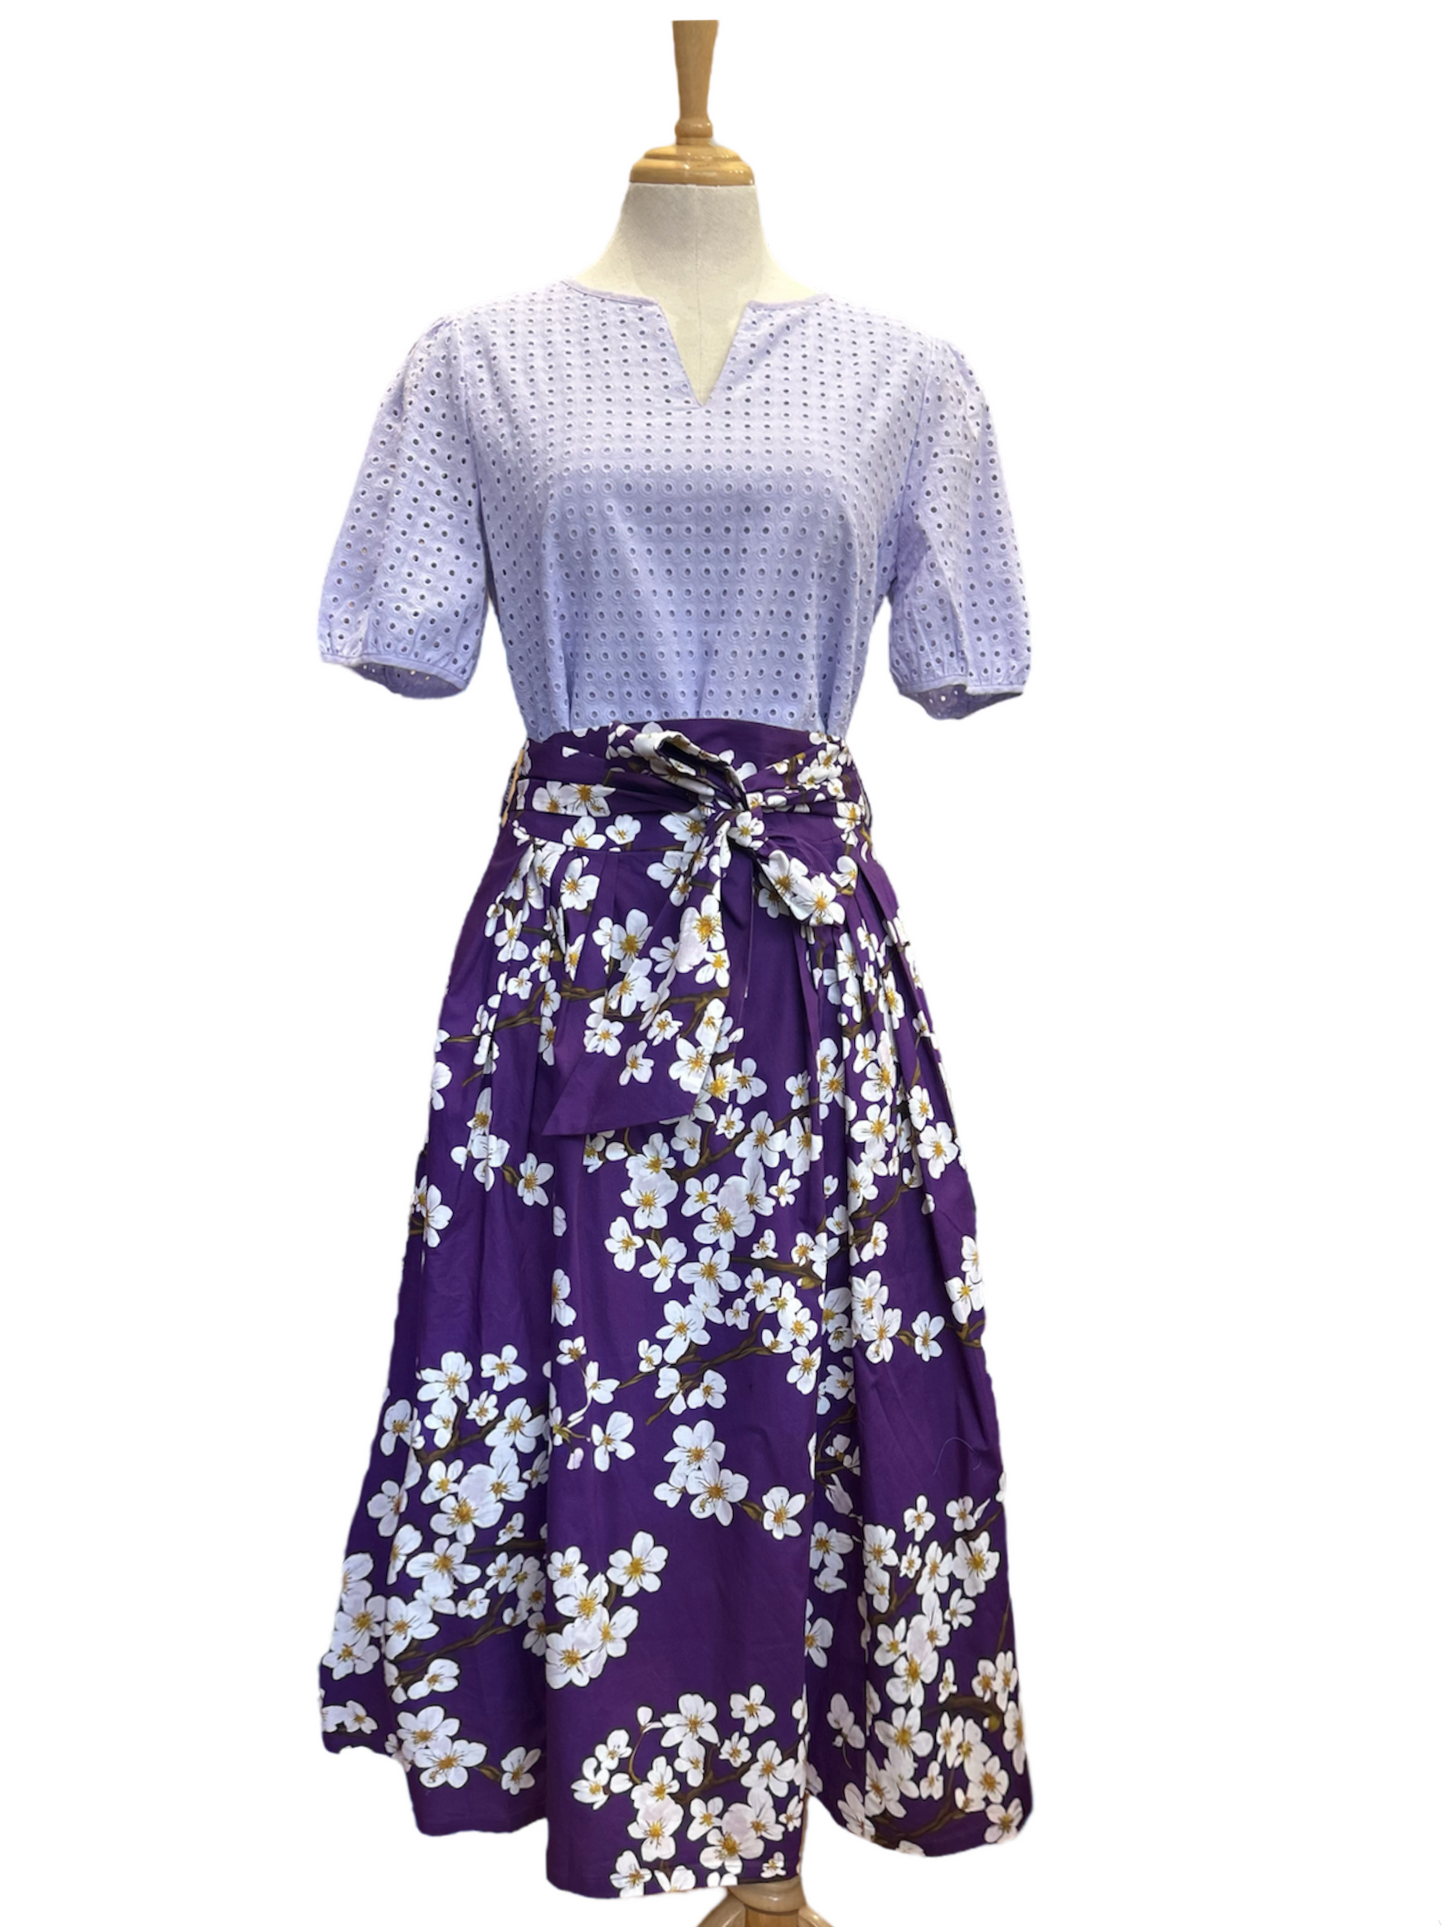 Camila Skirt - cherry blossom purple (size 8 & 14 ONLY)